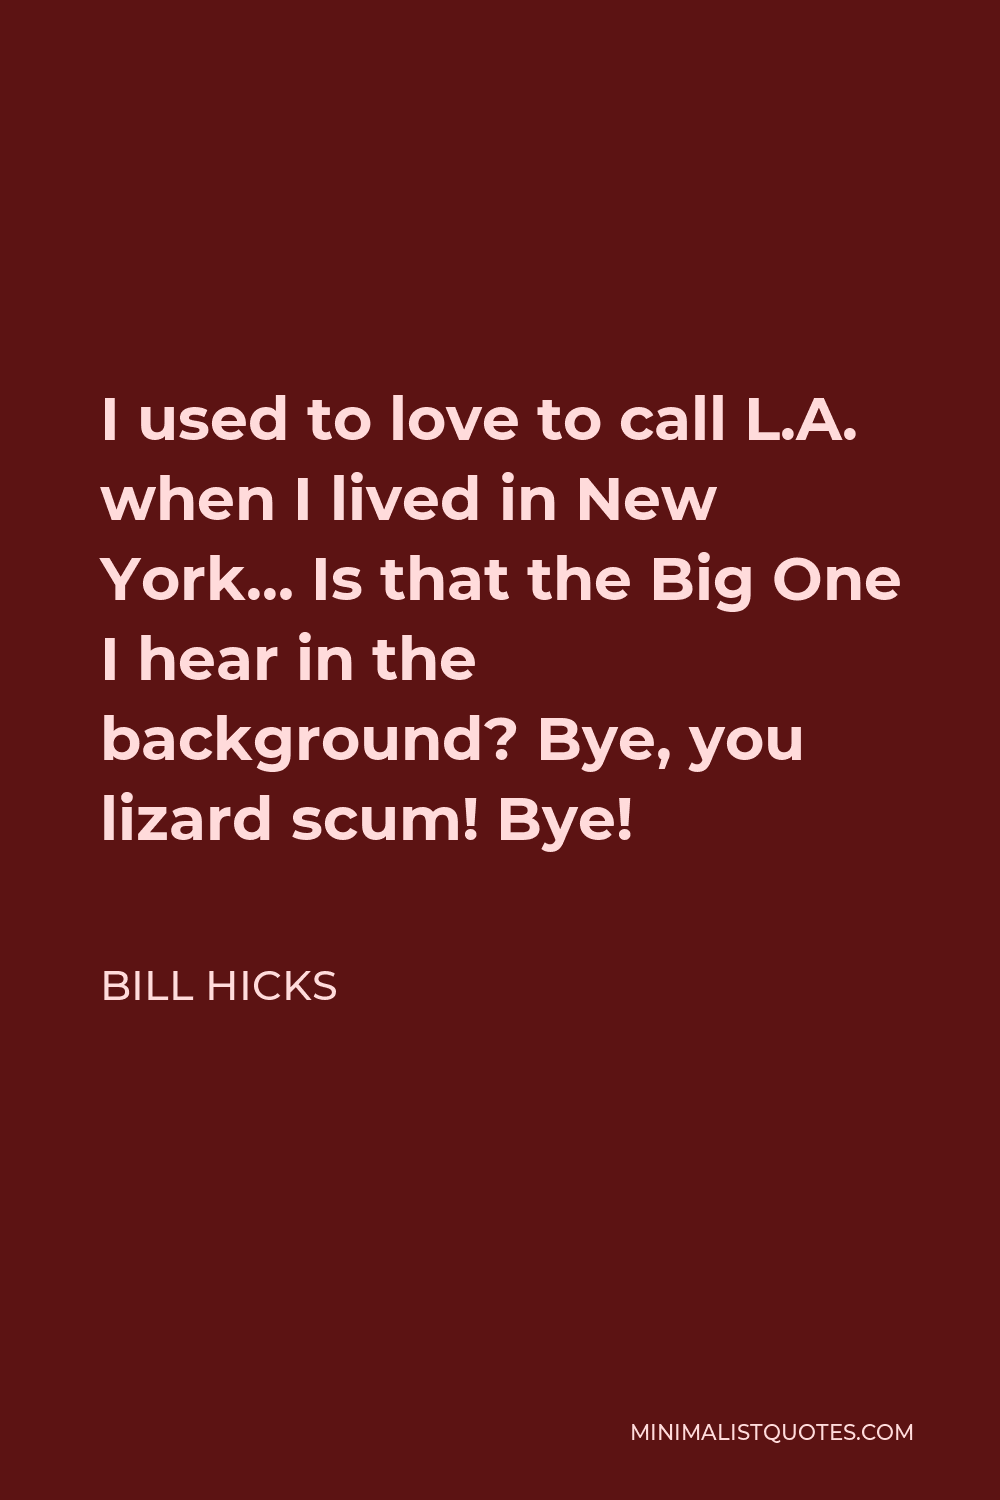 Bill Hicks Quote - I used to love to call L.A. when I lived in New York… Is that the Big One I hear in the background? Bye, you lizard scum! Bye!